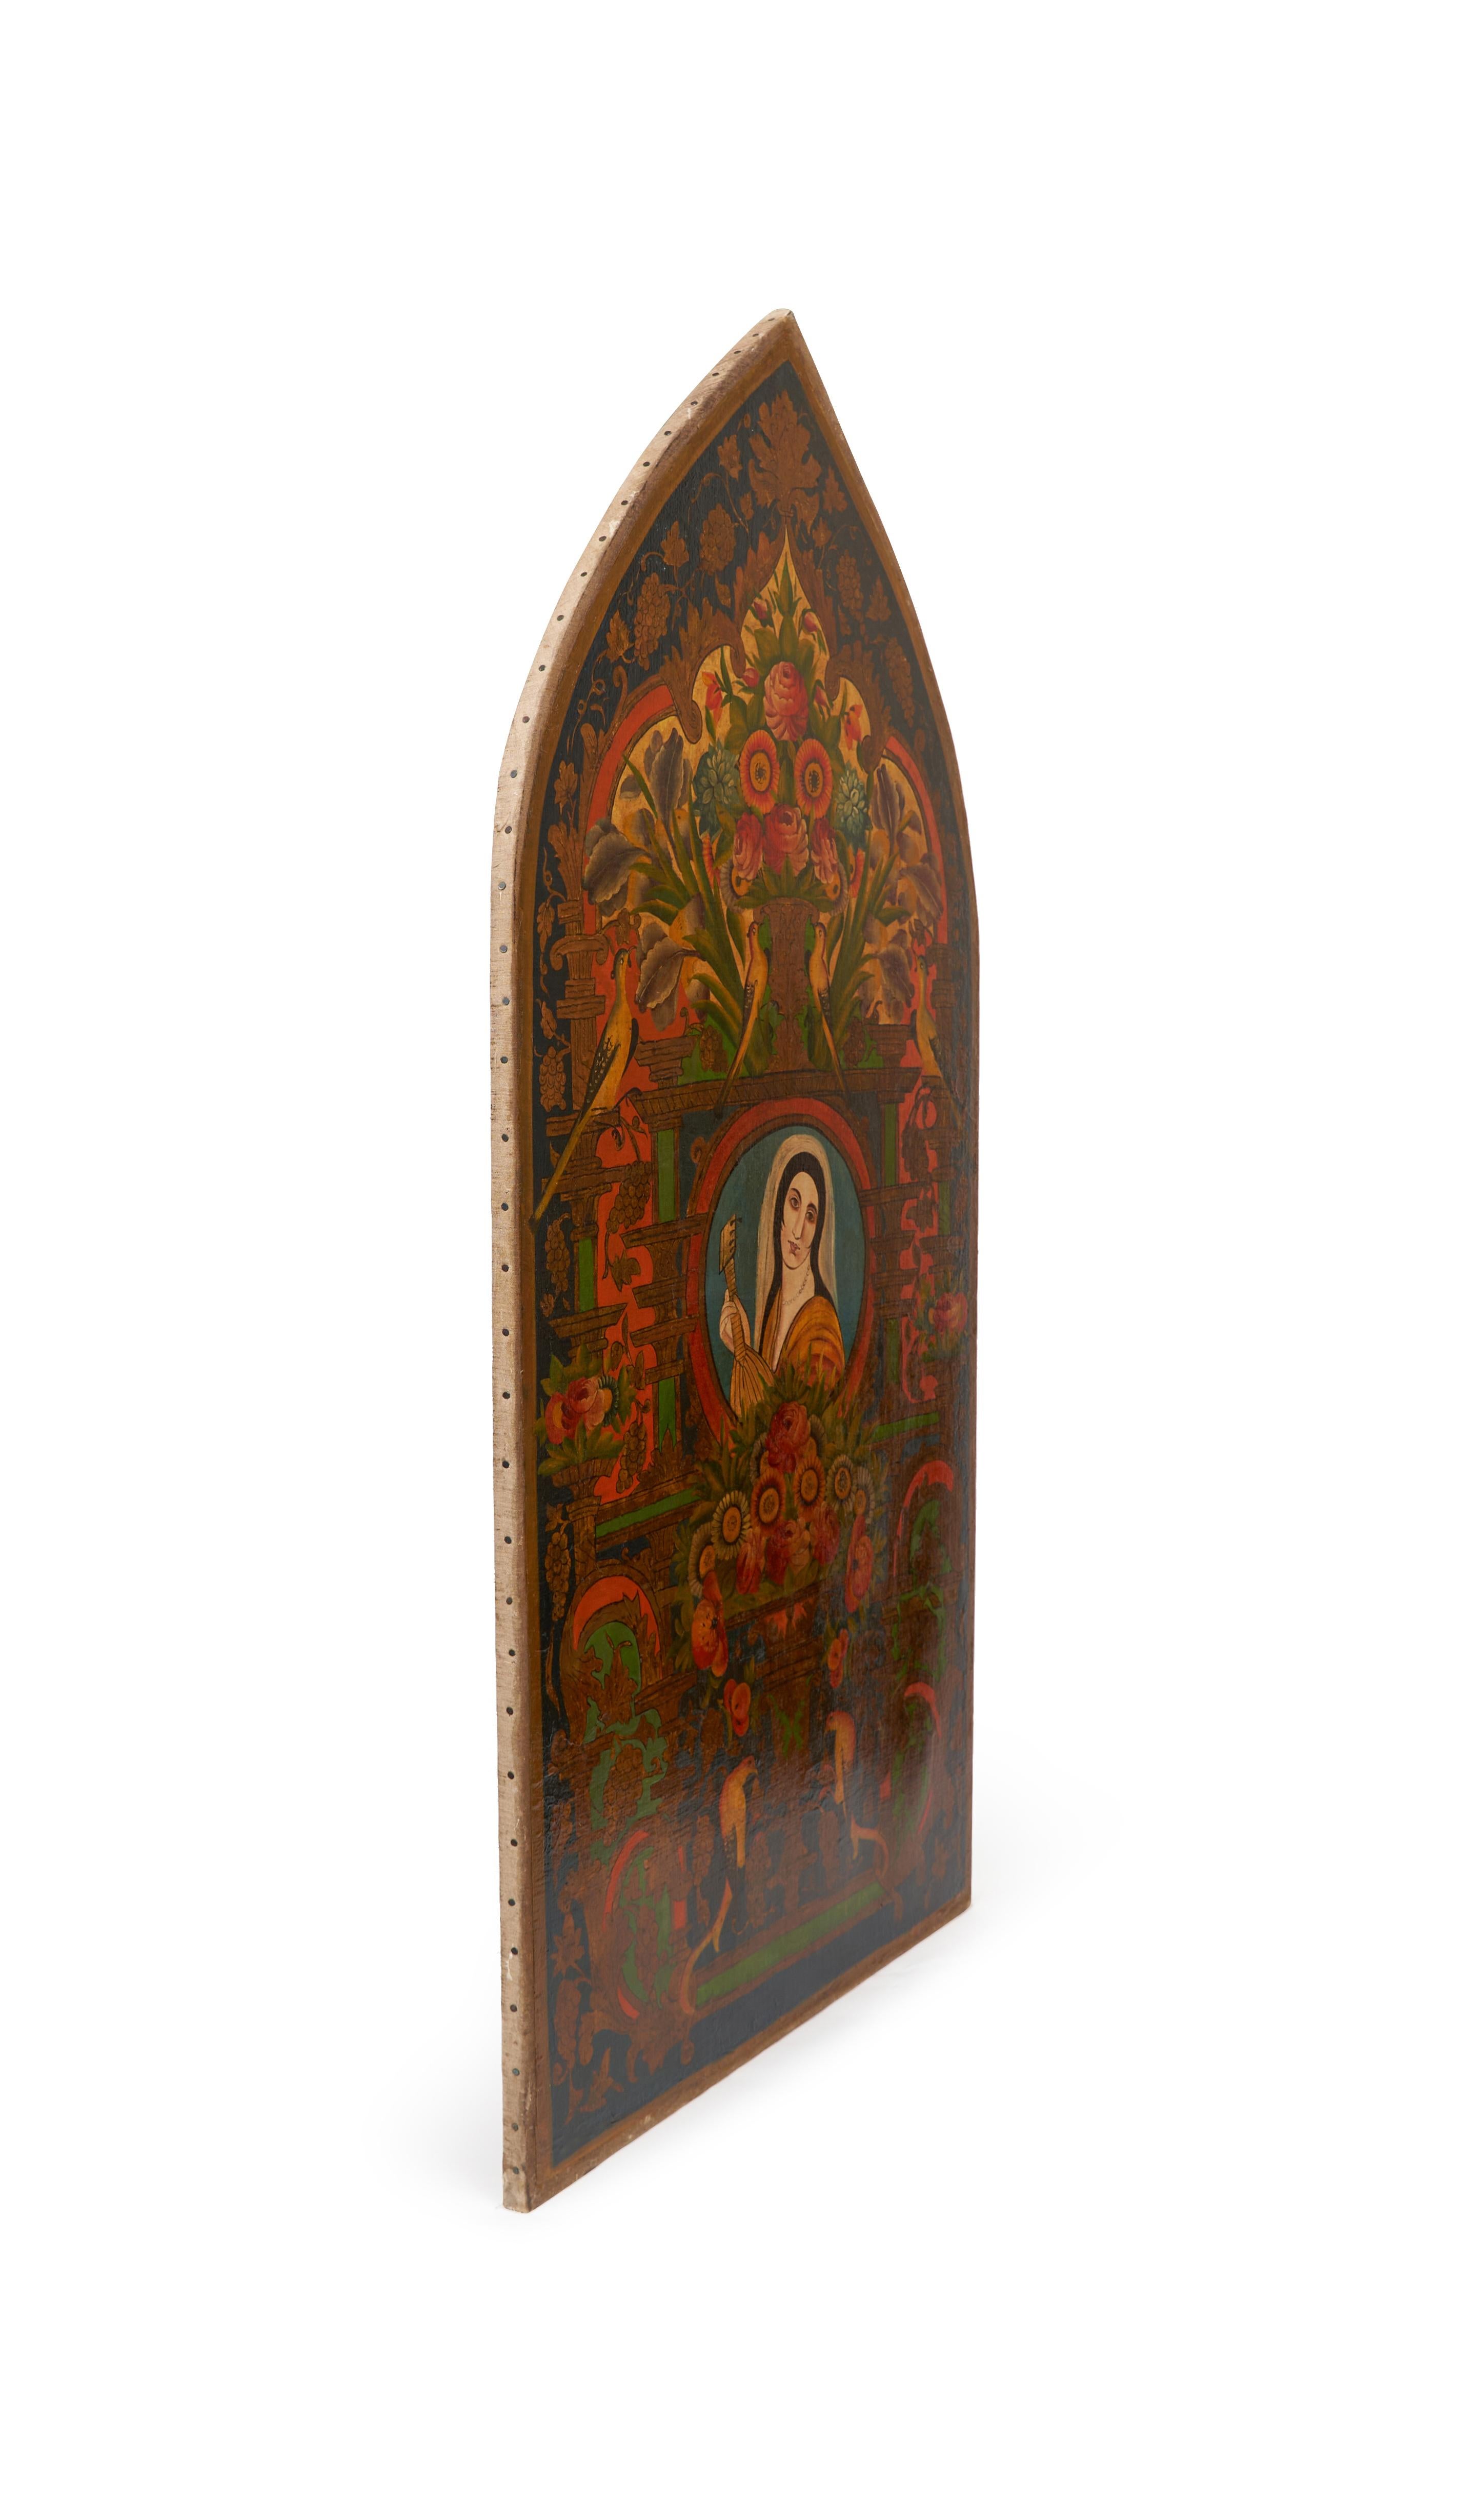 Oil on canvas, heightened in gold, large vertical panel cut in the shape of ogival arch, depicting a central portrait roundel with a Westernised Qajar maiden wearing a white veil and holding a string instrument, possibly a Persian lute (barbat),